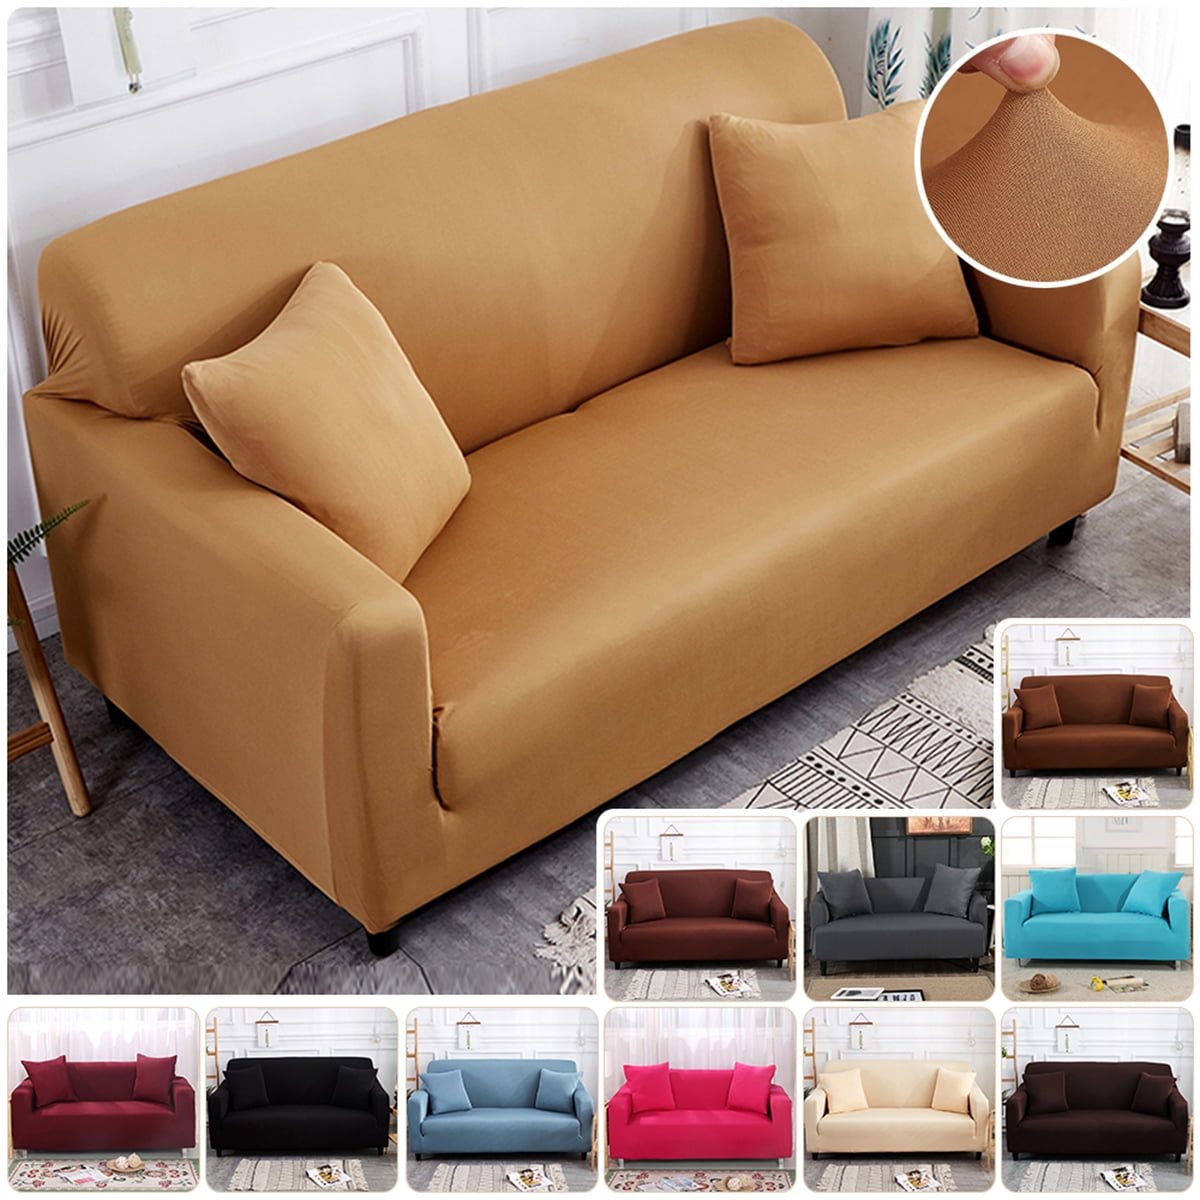 Details about   Solid 1/2/3/4 Stretch Sofa Covers 4 Seater Set Couch Cover Slipcovers Protector